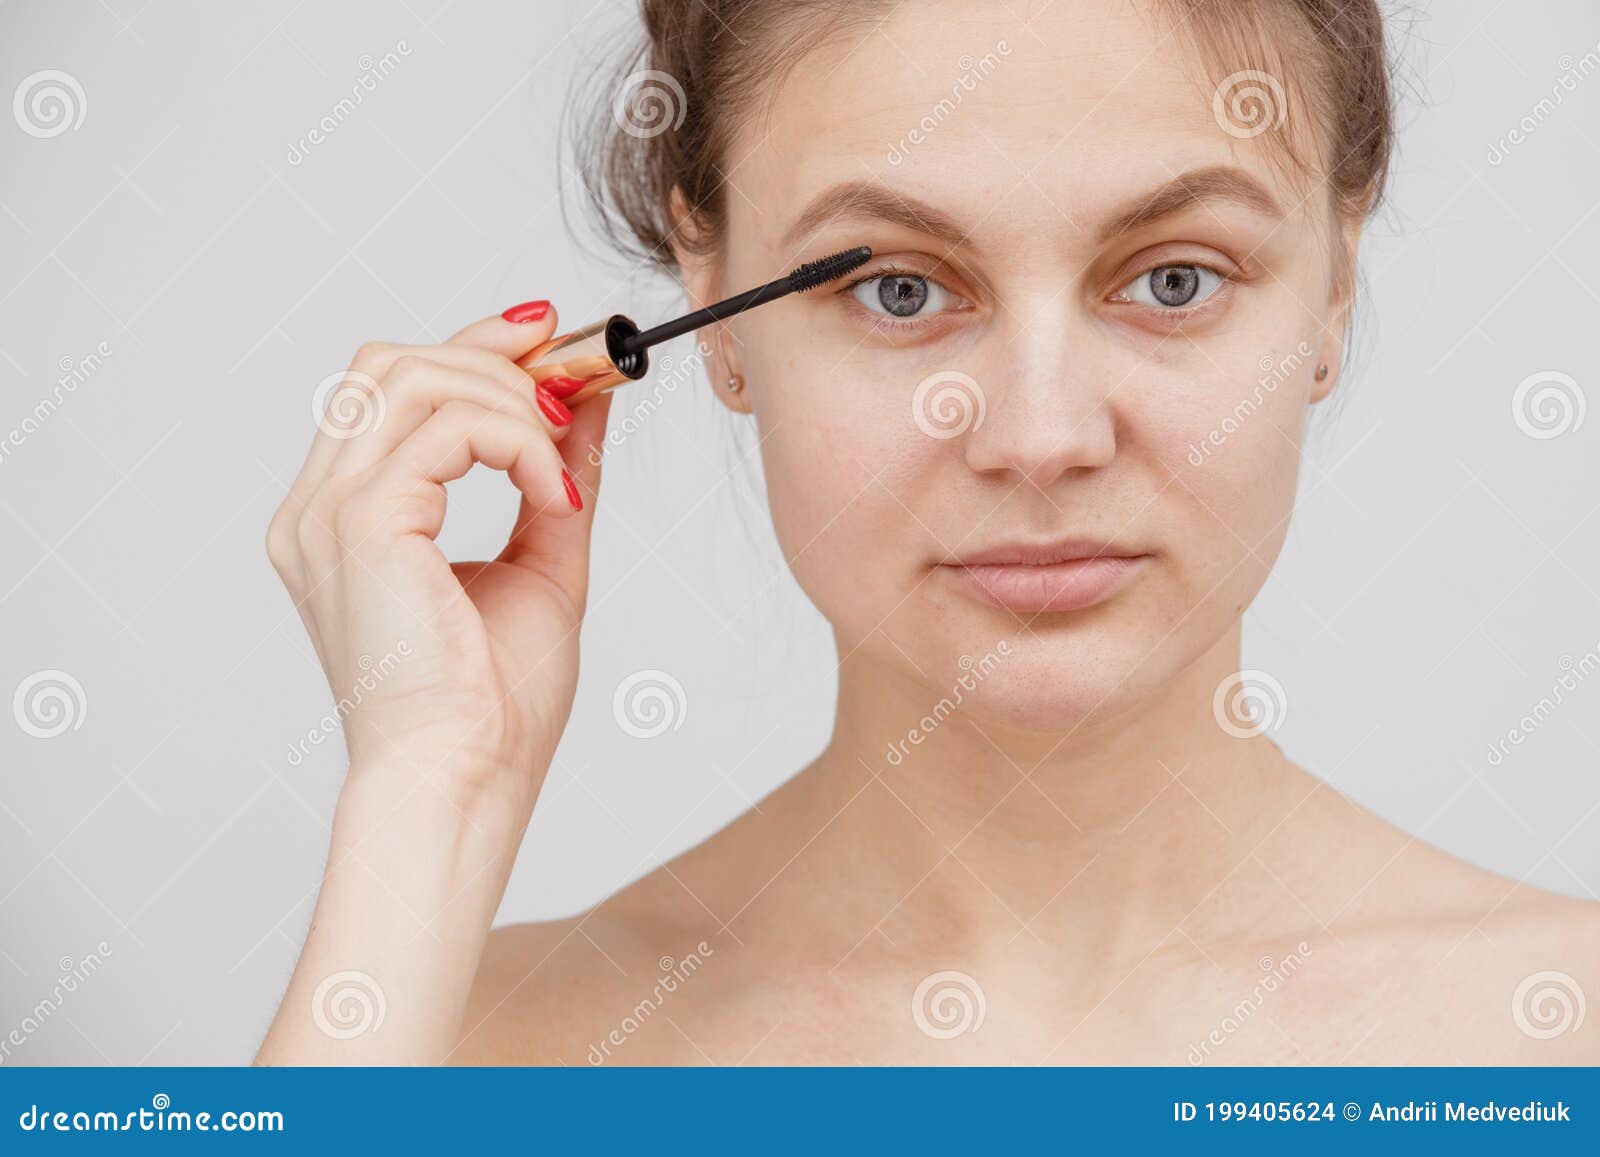 a young girl paints her eyelashes with mascara. face close-up. facial care